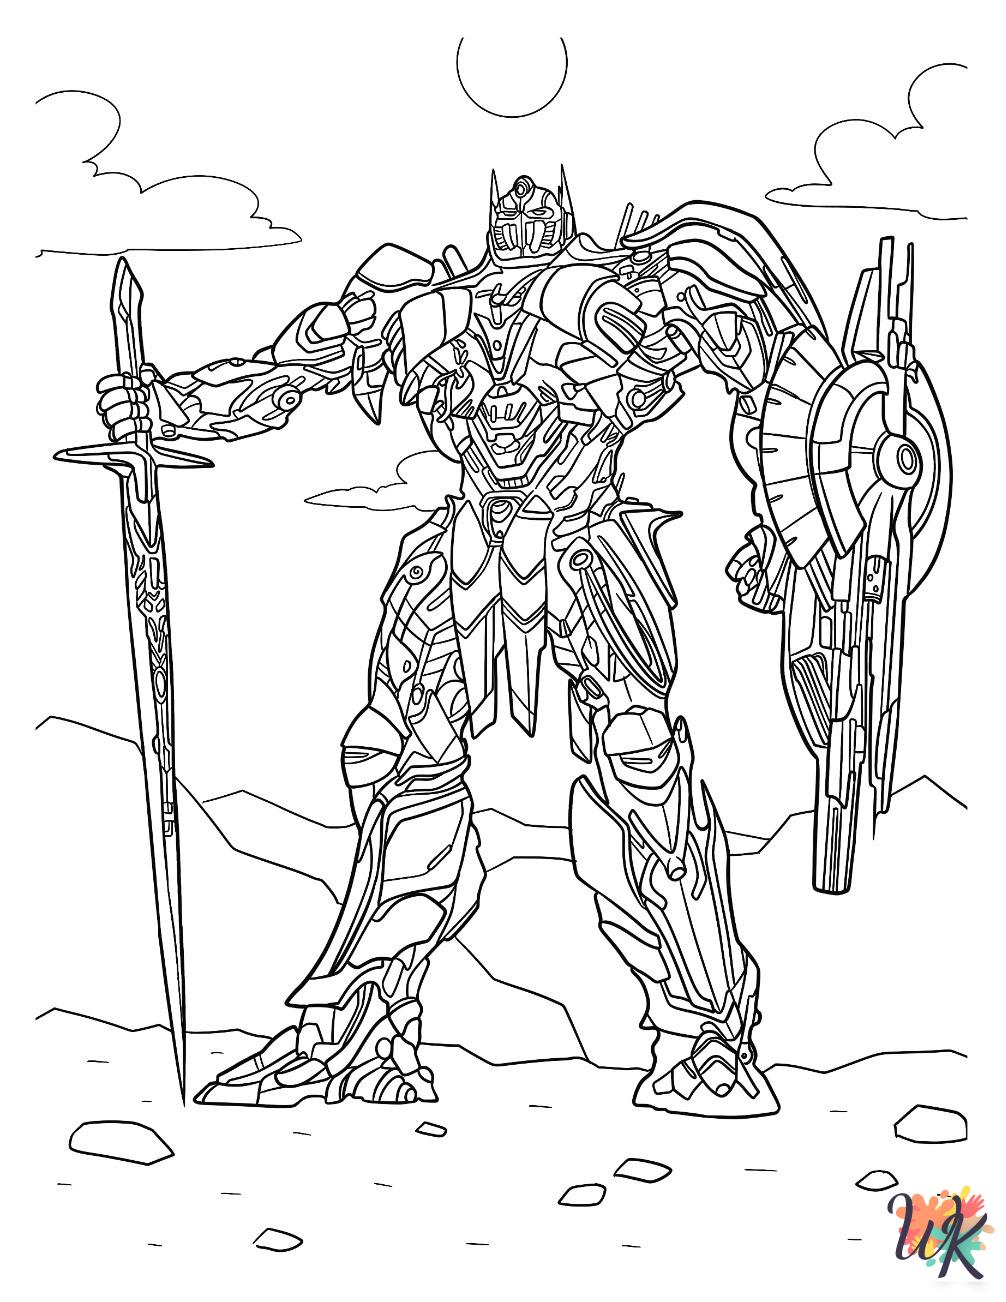 Optimus Prime coloring pages for kids